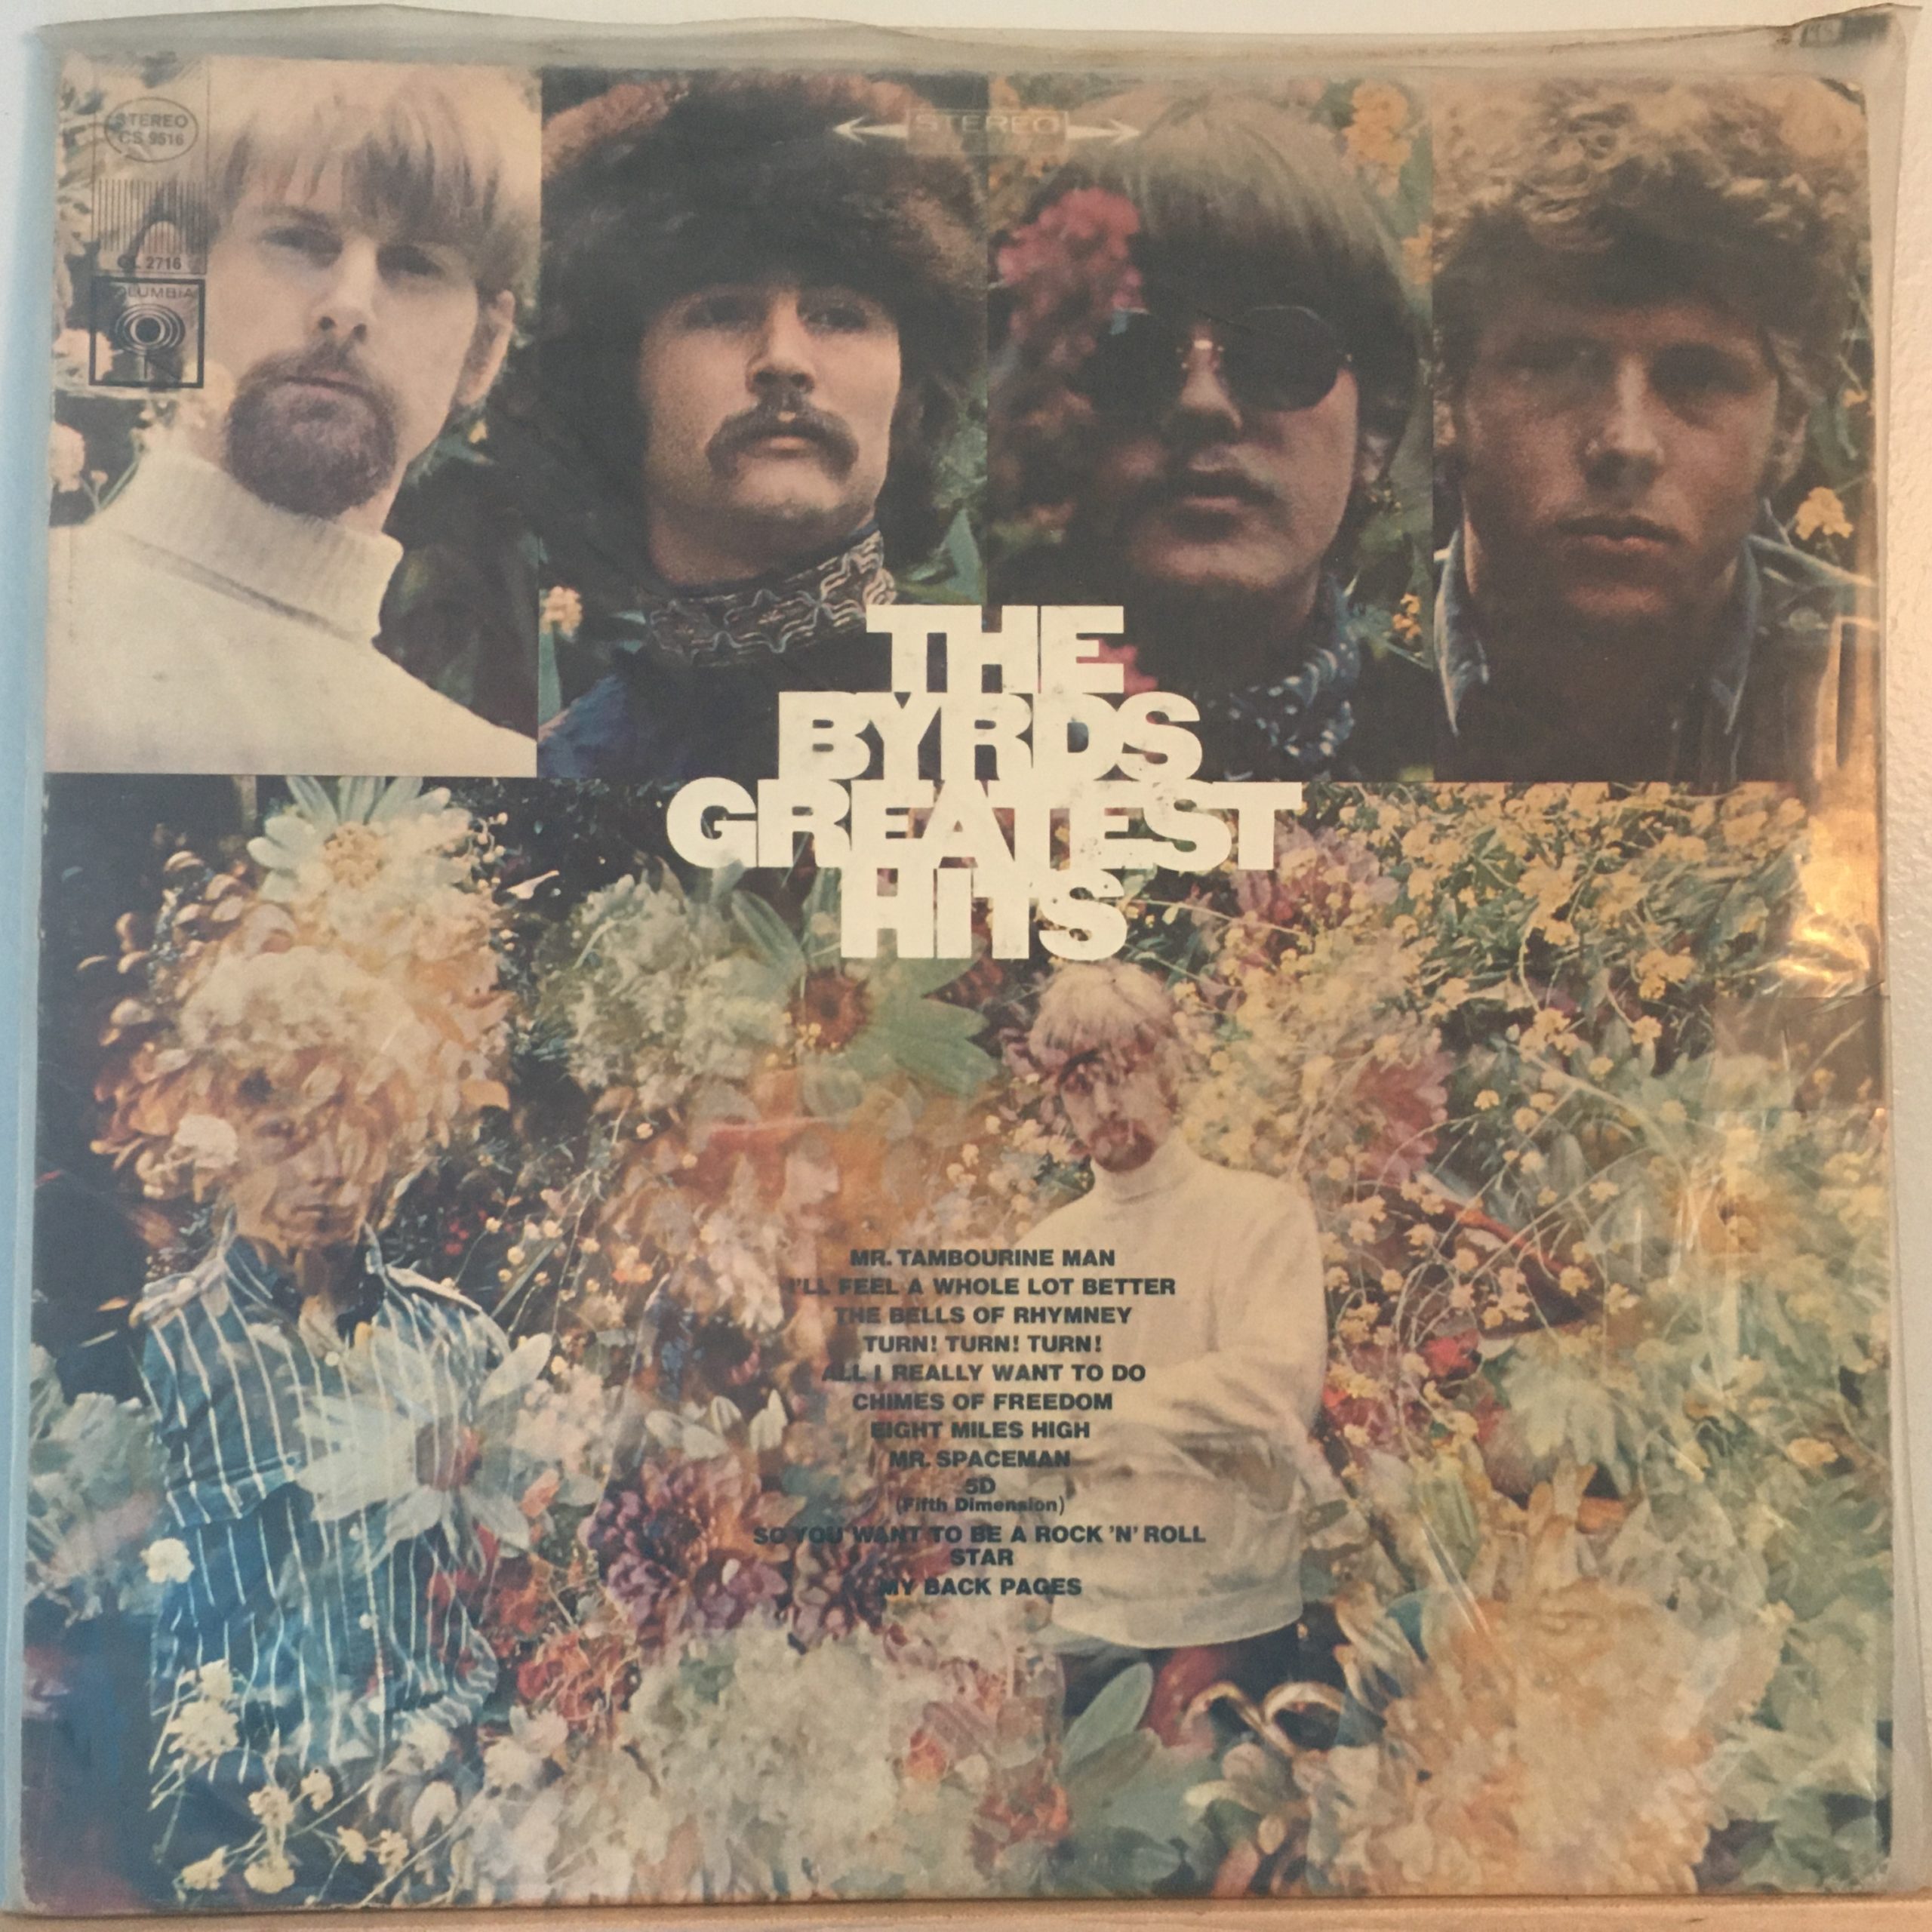 Byrds Greatest Hits front cover